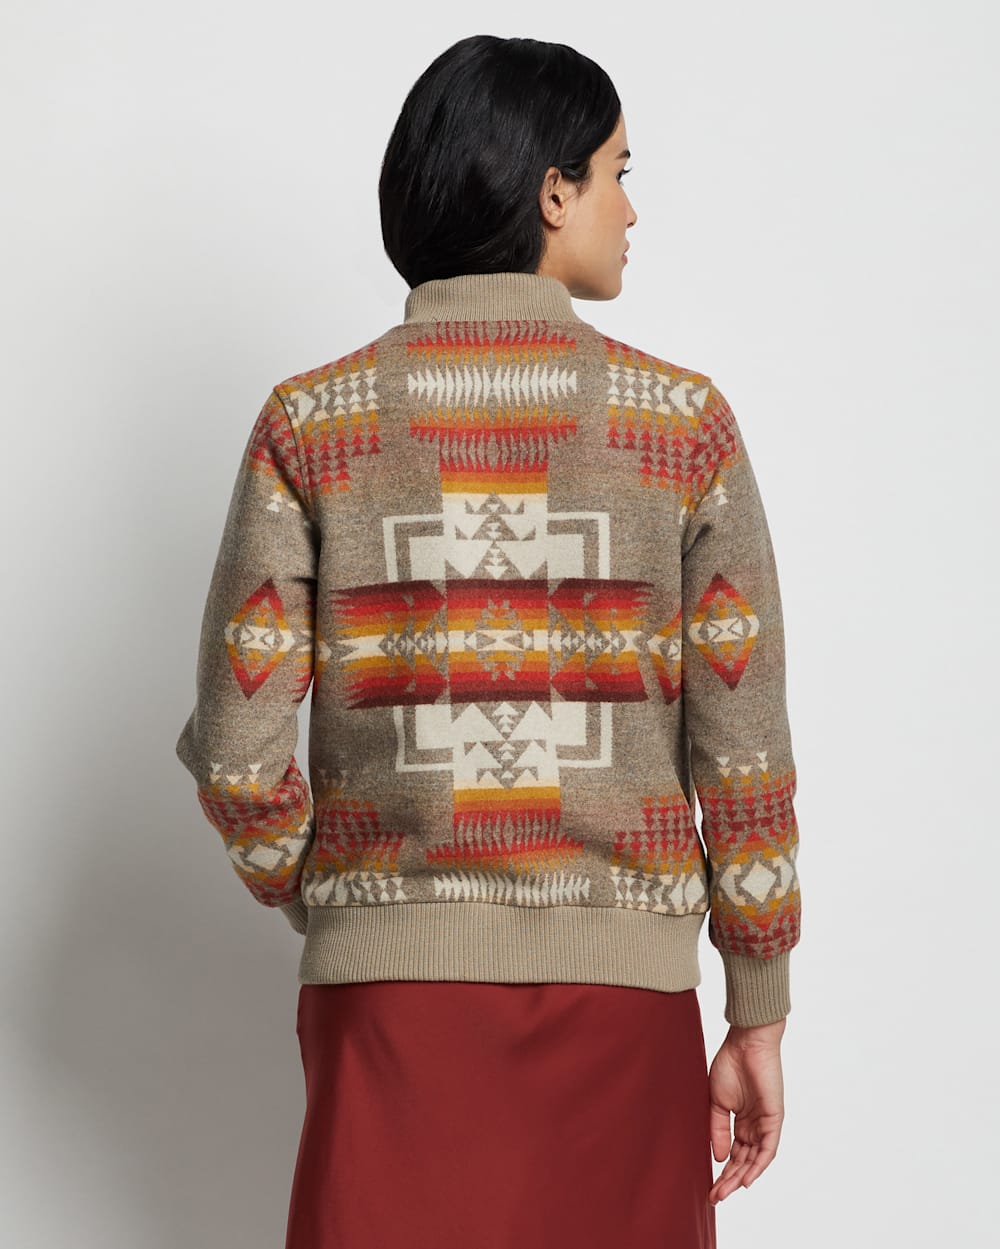 ALTERNATE VIEW OF WOMEN'S WOOL BOMBER JACKET IN TAUPE CHIEF JOSEPH image number 5